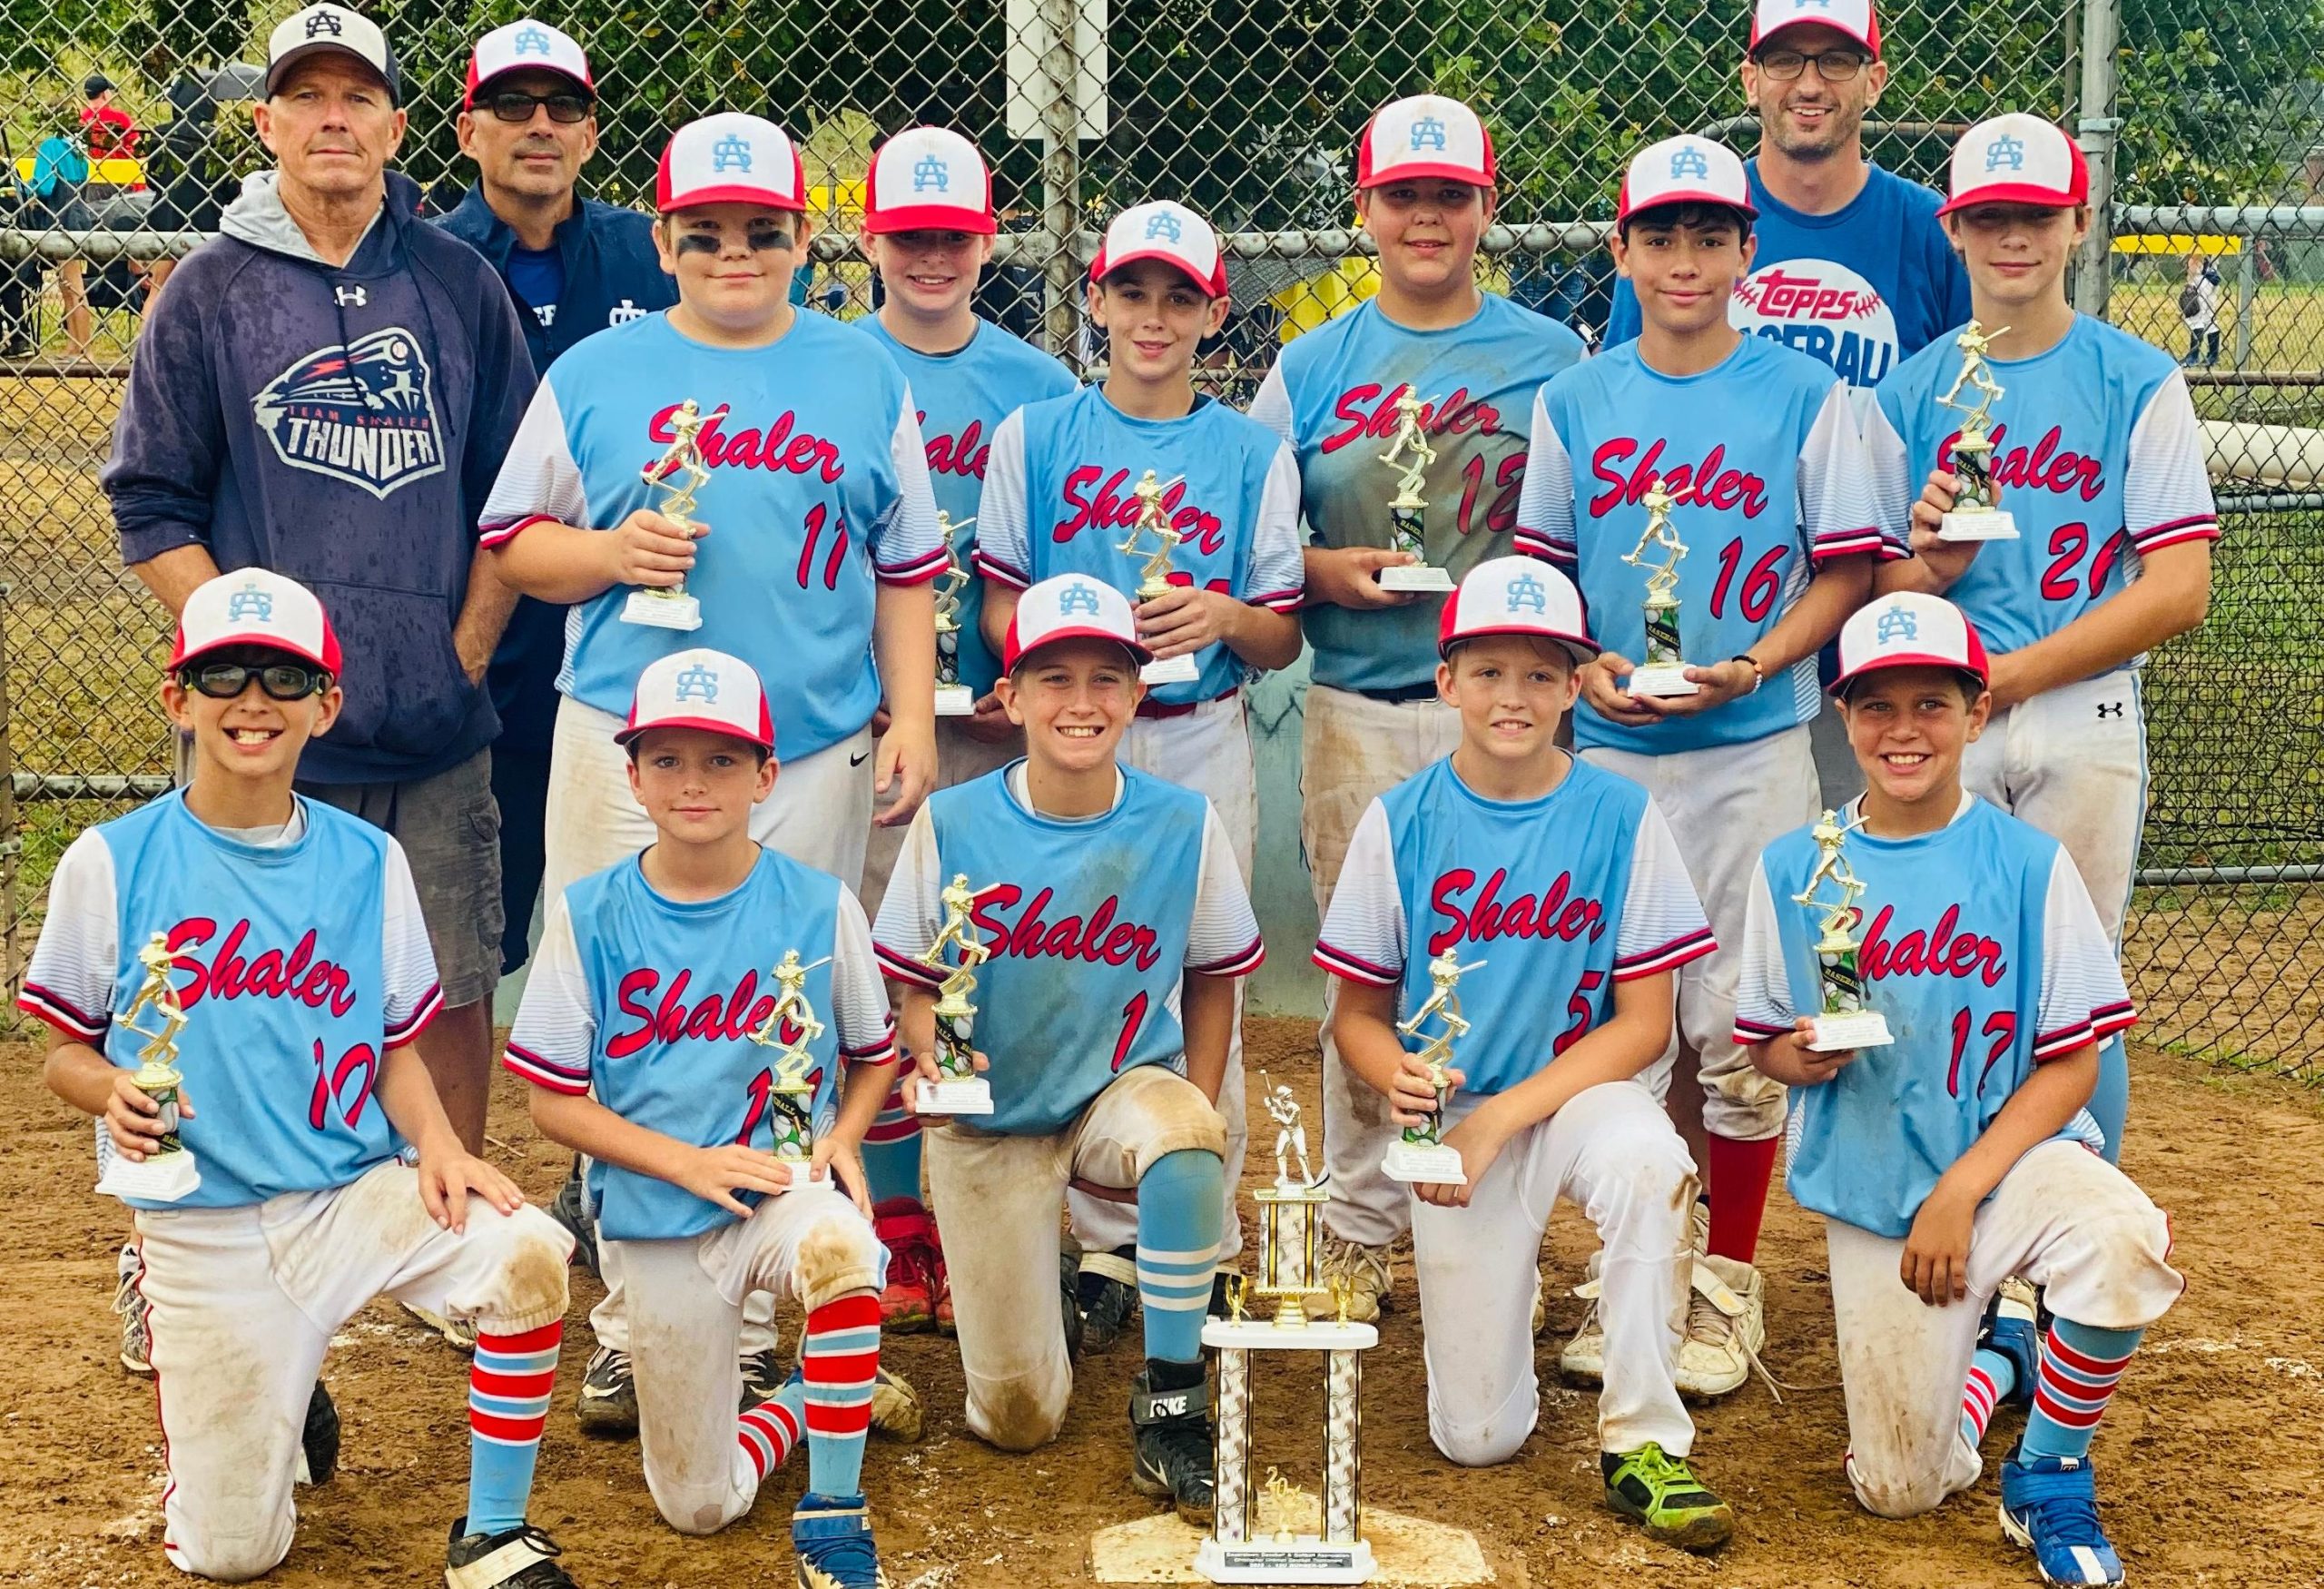 12U Team takes 2nd place in Bauerstown Tournament